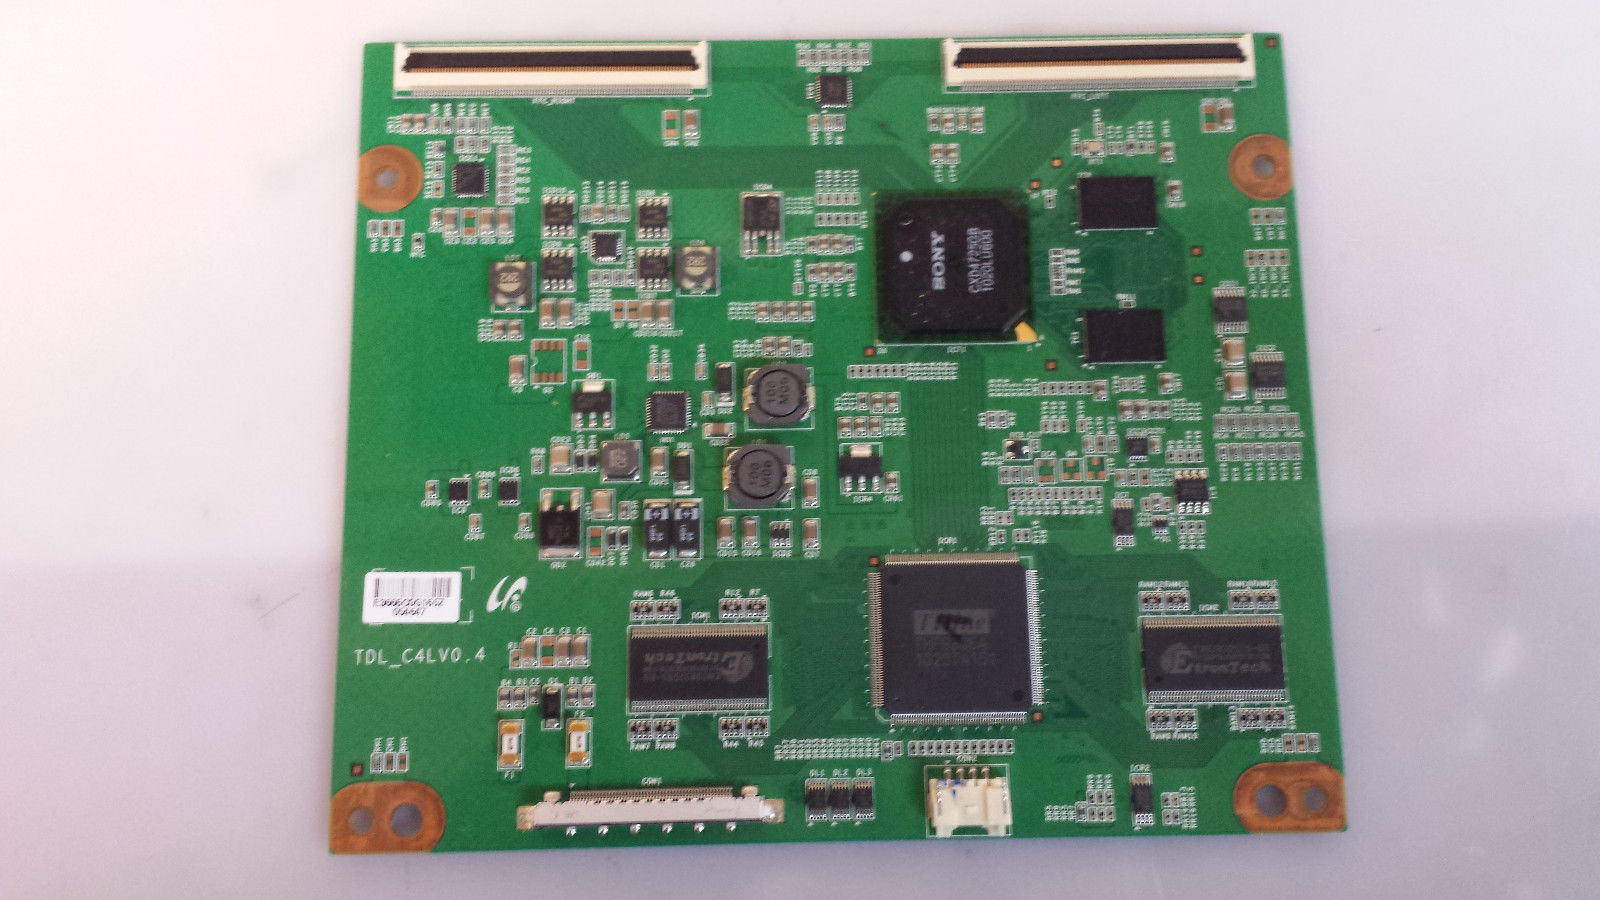 Sony 1-857-817-11 (TDL-C4LV0.4) T-Con Board for KDL-40EX710 TEST